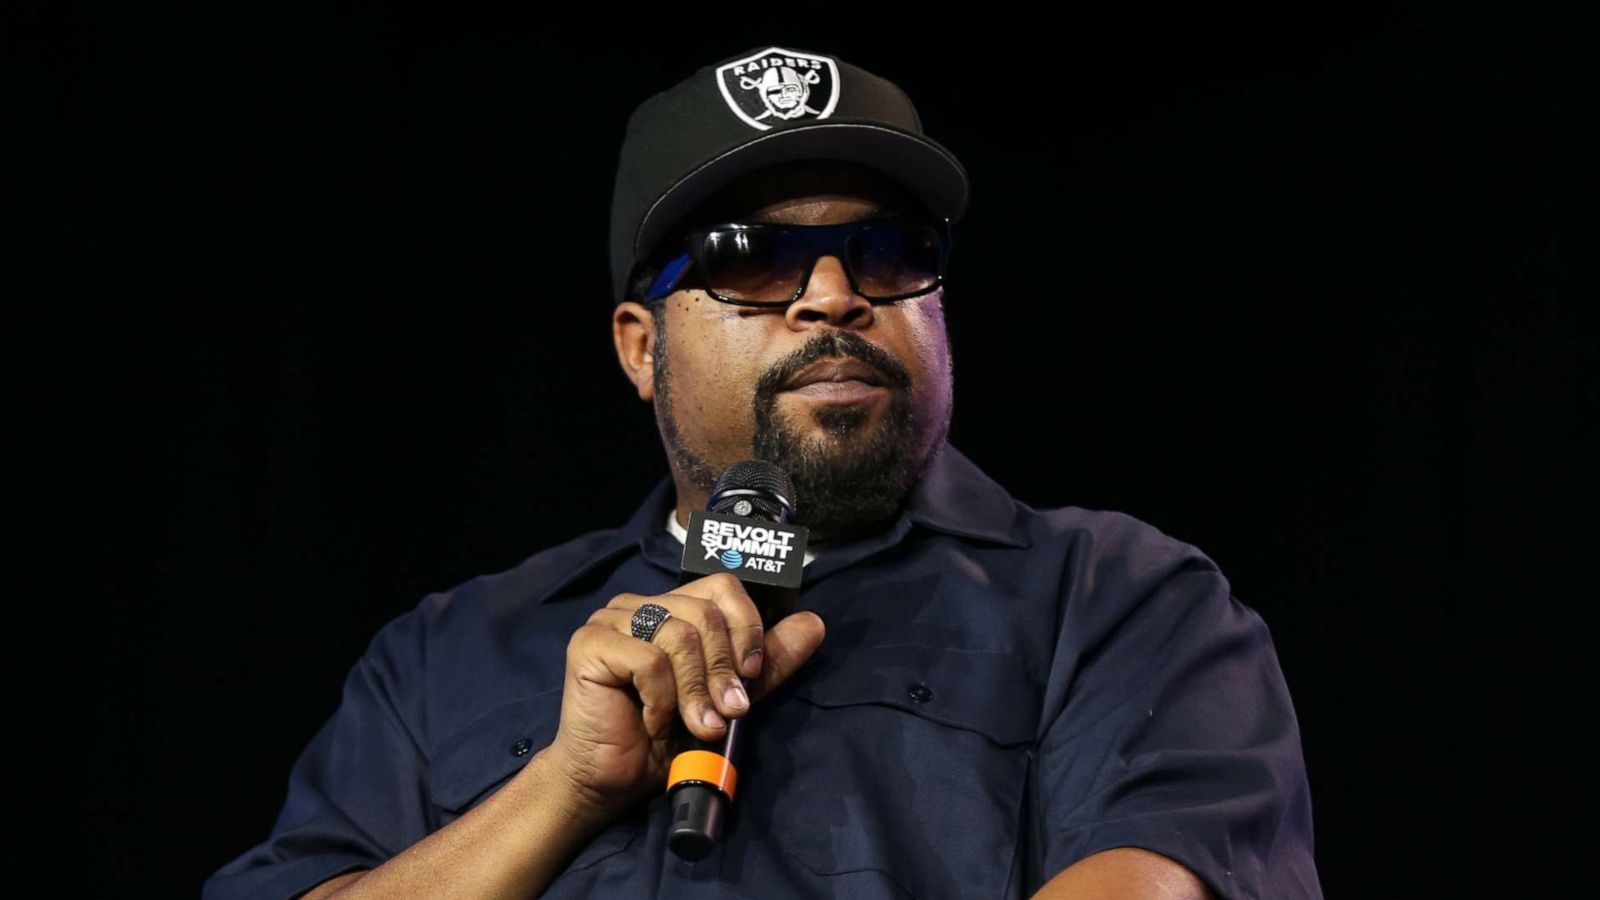 From N.W.A. to MAGA: Ice Cube takes some heat for working with the Trump  administration